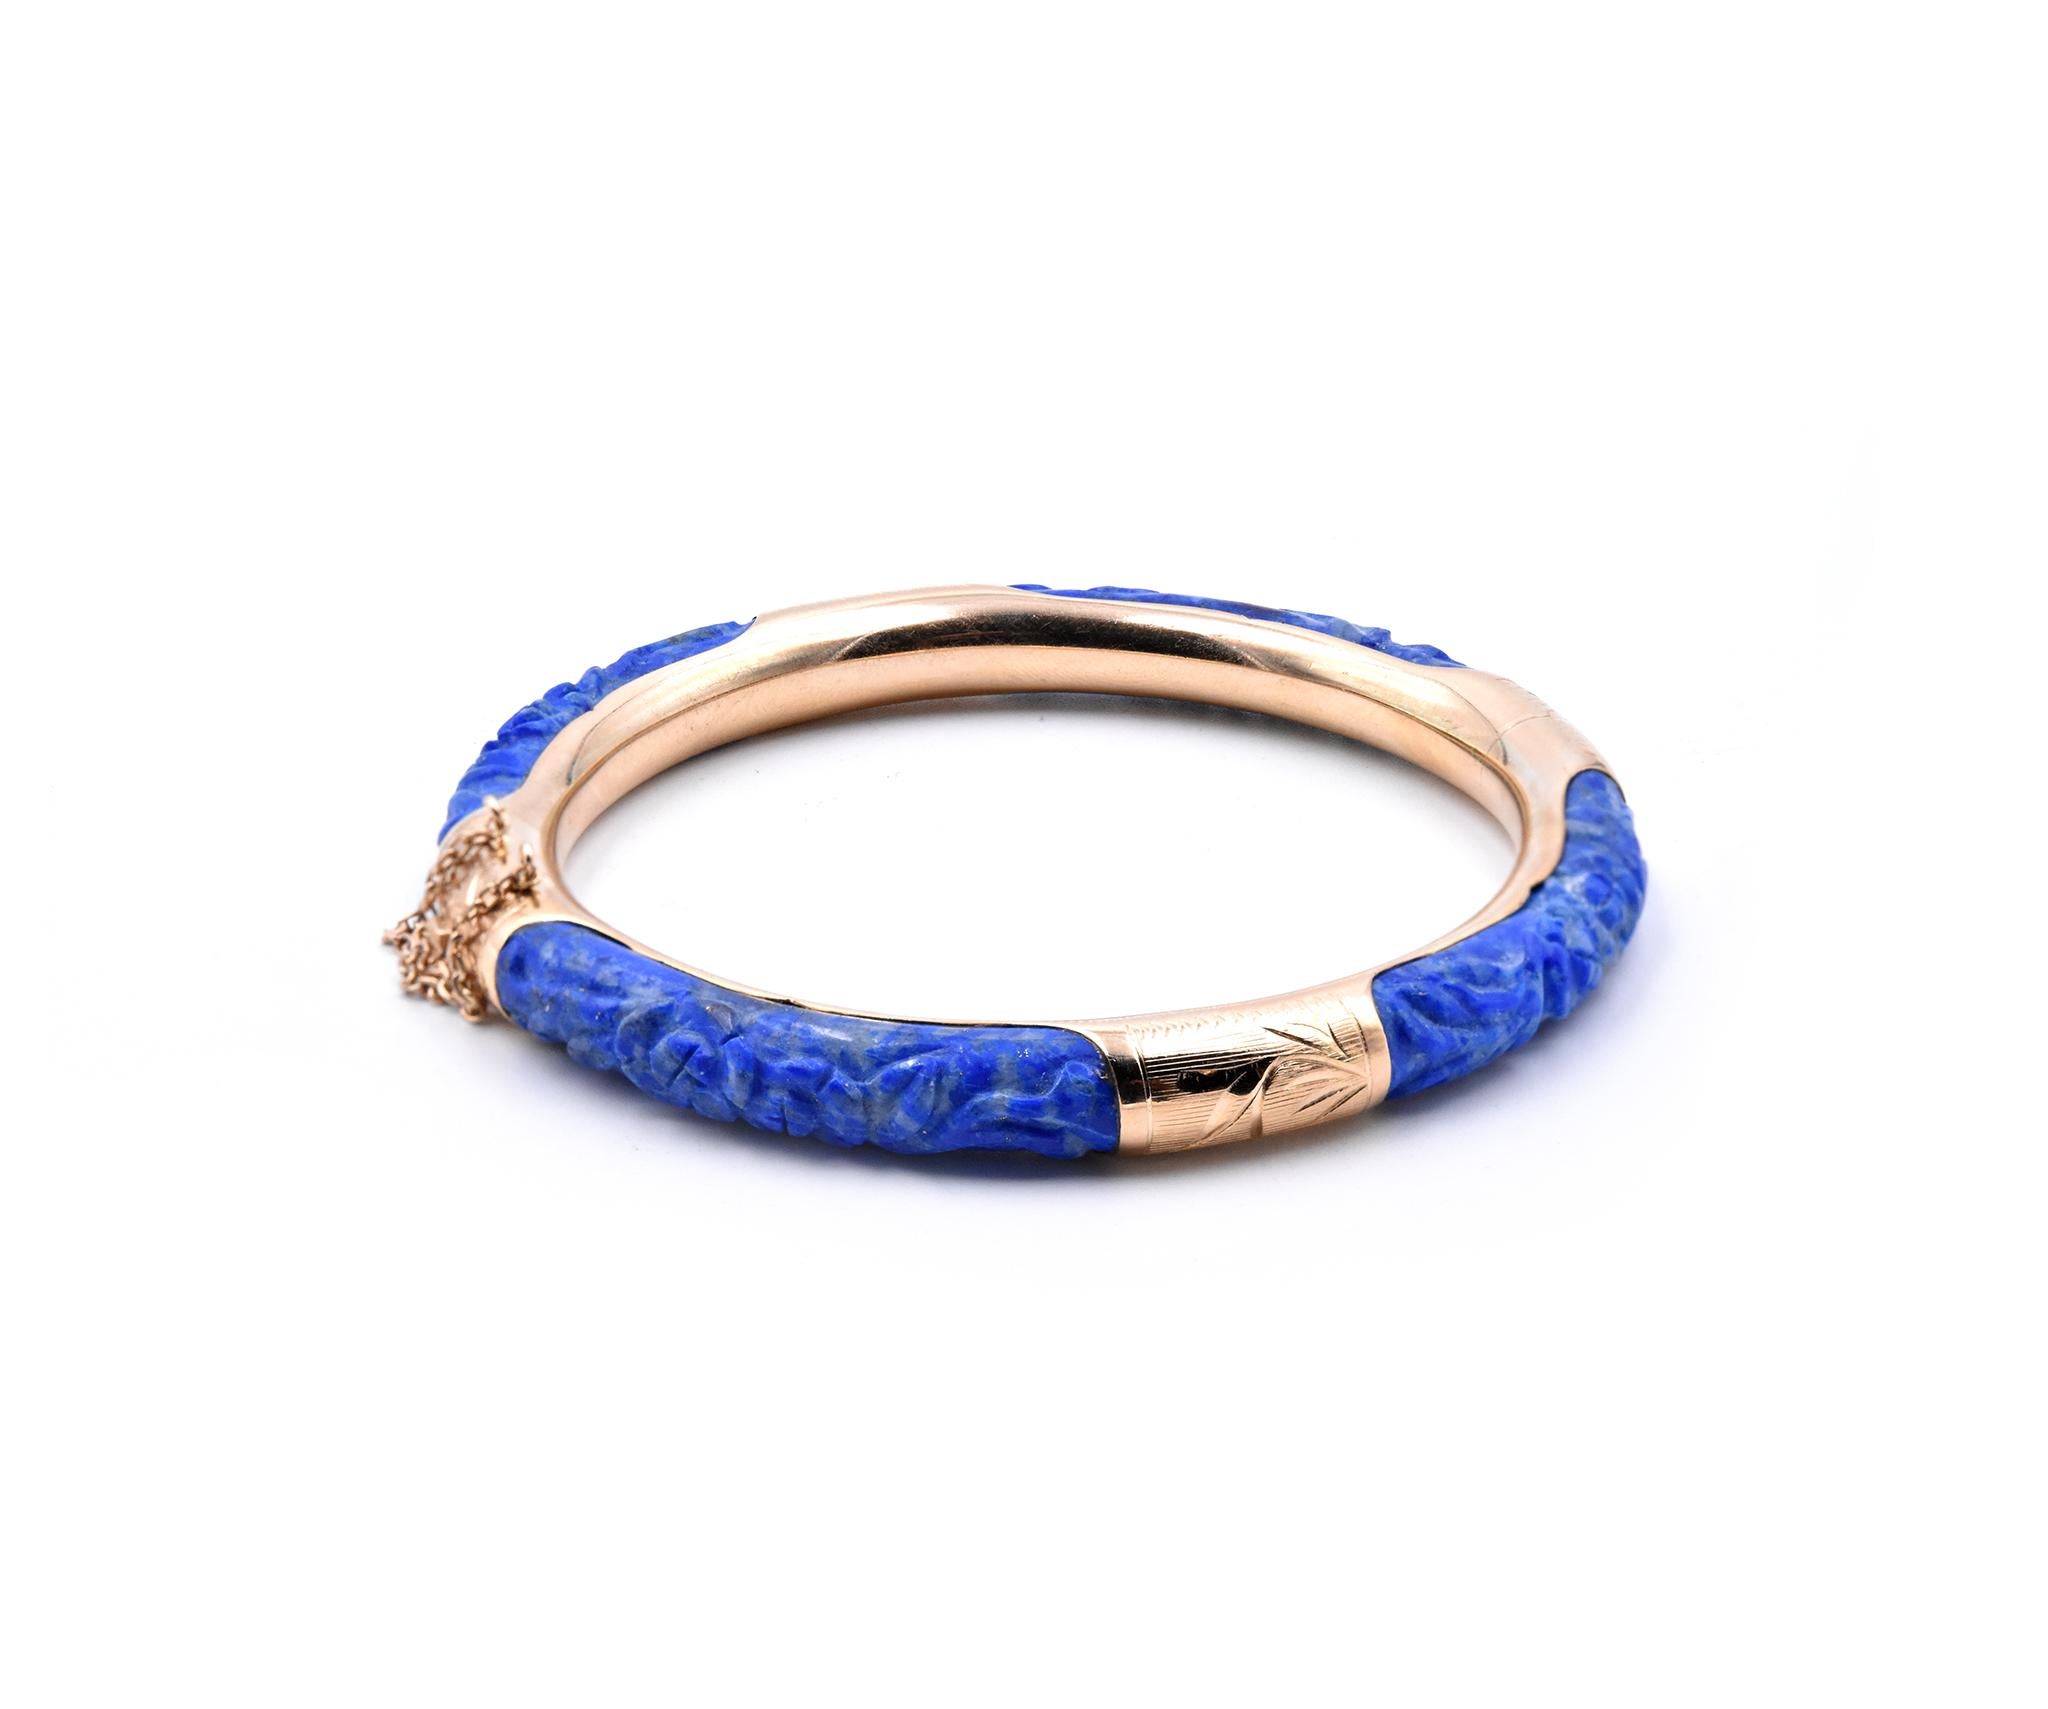 Designer: custom
Material: 14K yellow gold
Dimensions: bracelet will fit a 7-inch wrist 
Weight: 27.61 grams
